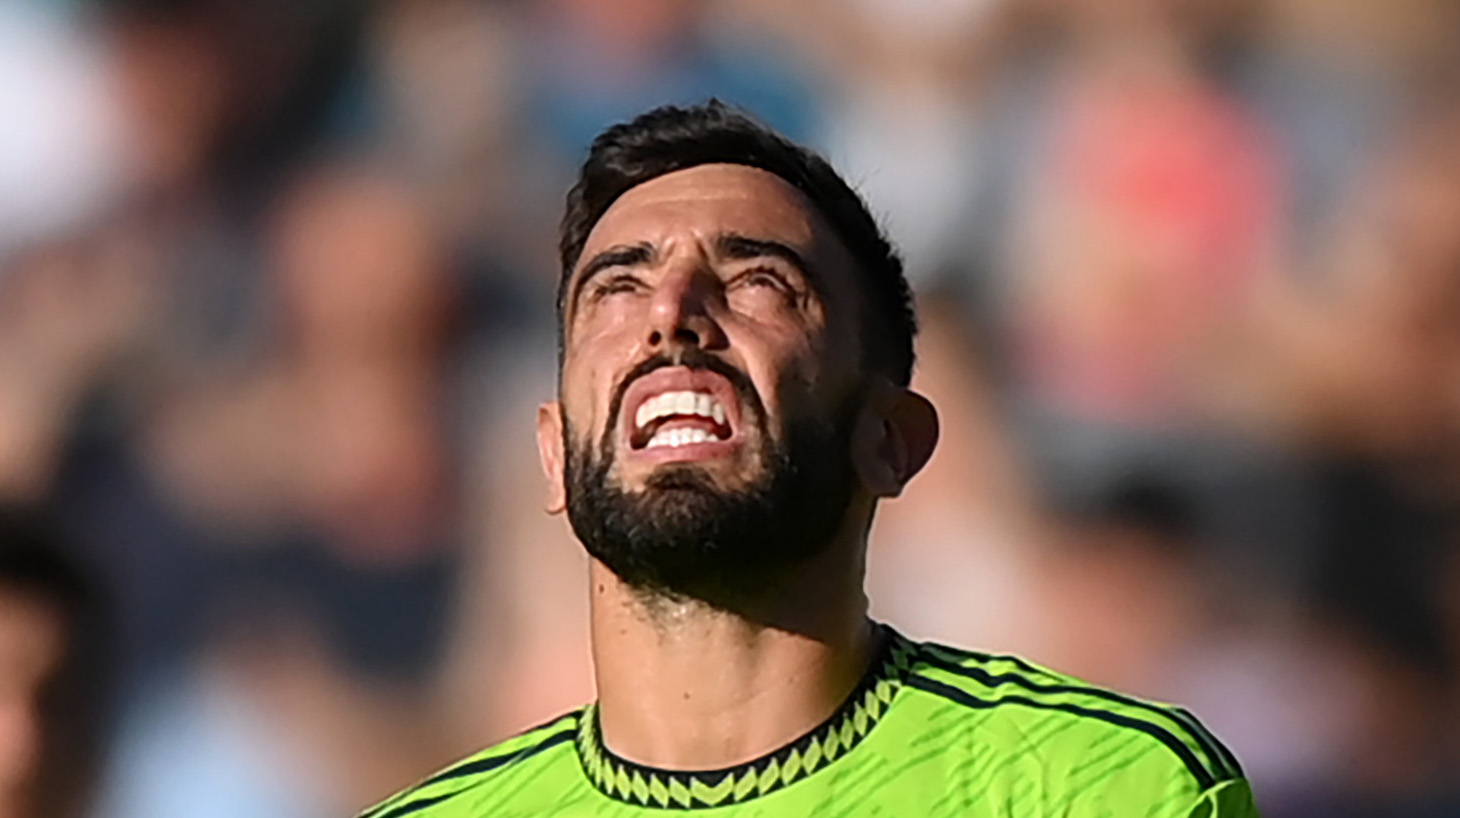 Bruno Fernades of Manchester United looks dejected during the Premier League match between Brentford FC and Manchester United at Brentford Community Stadium on August 13, 2022 in Brentford, England.